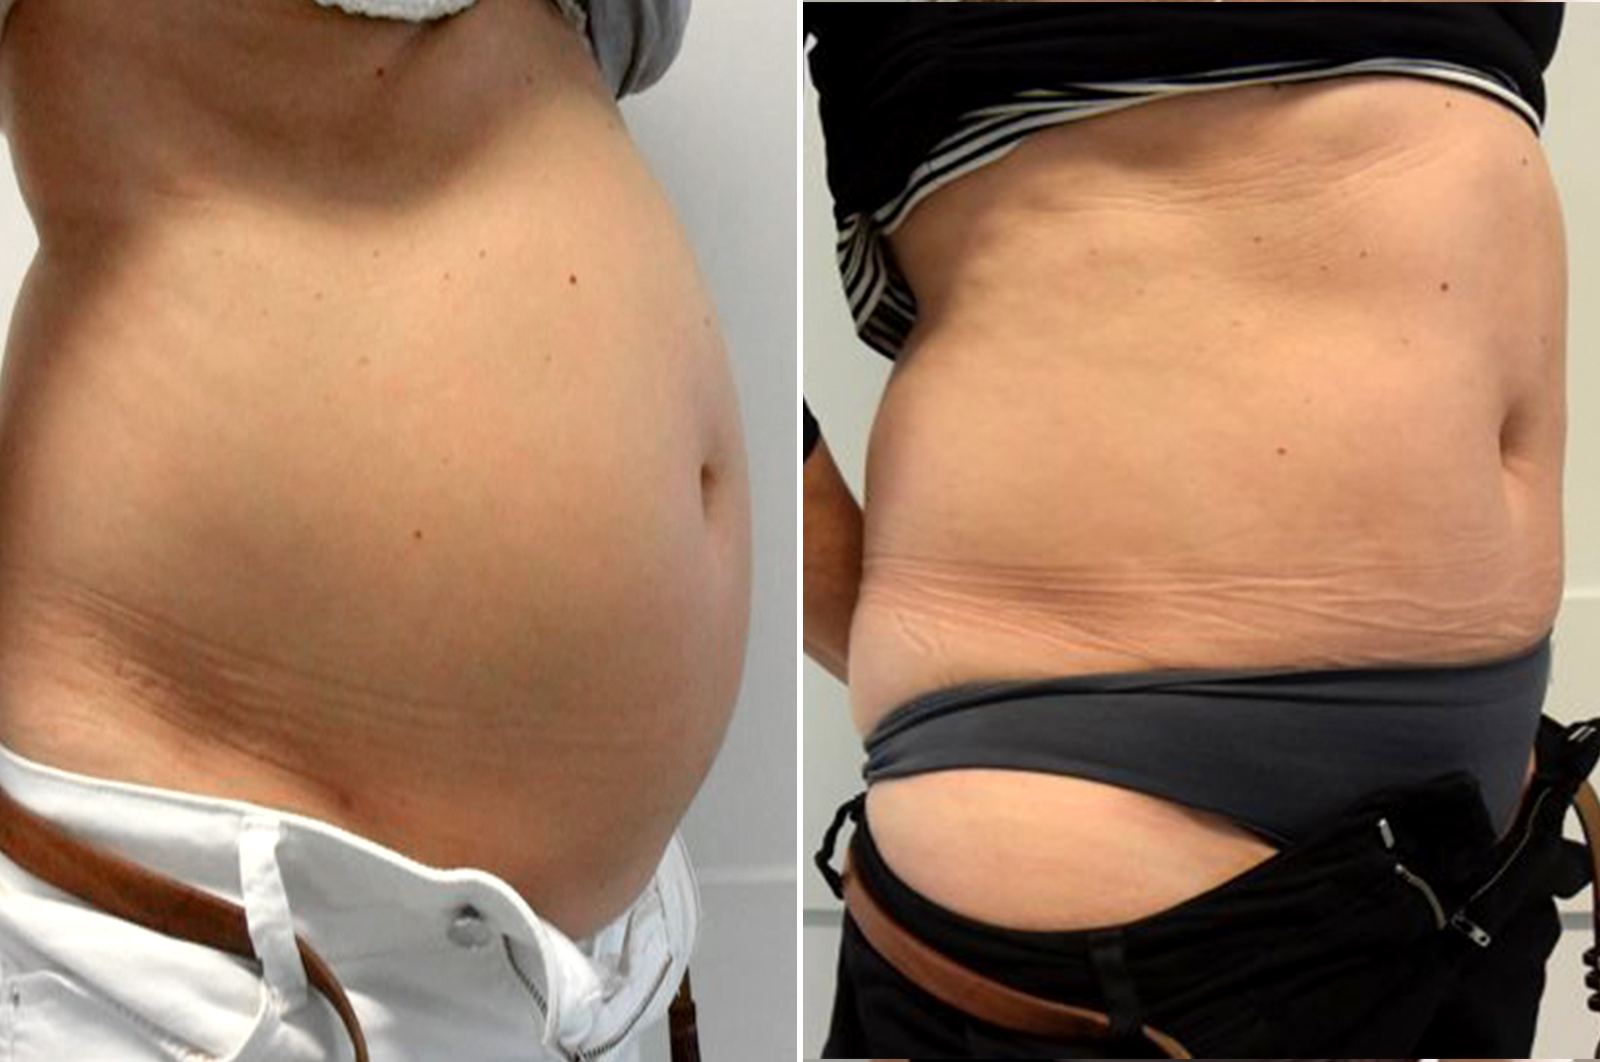 Body surgery abdominoplasty before and after surgery in antwerp